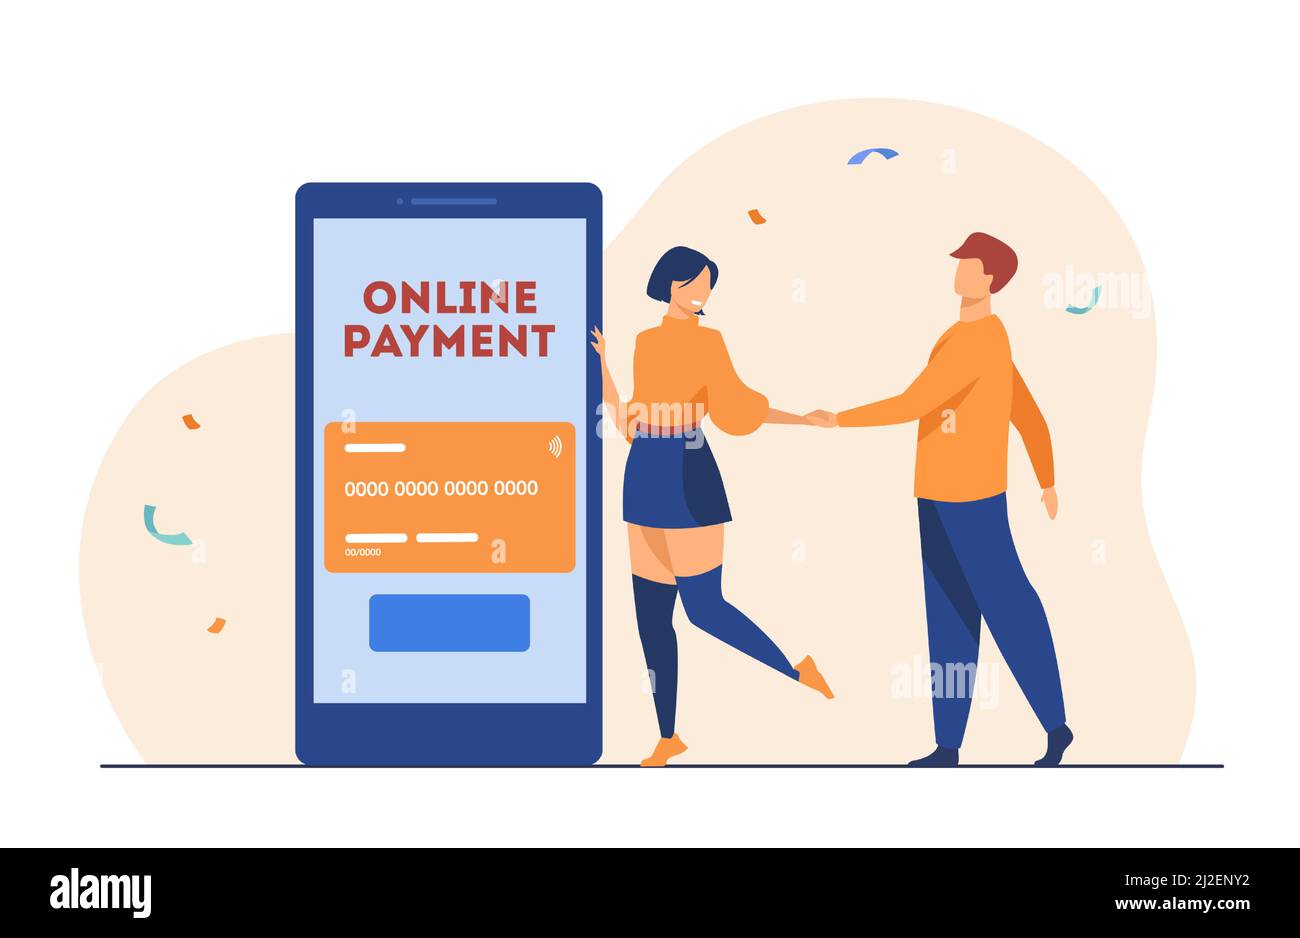 People using online payment mobile app. Woman showing interface on phone screen to man. Flat vector illustration. Online bank, finance concept for ban Stock Vector